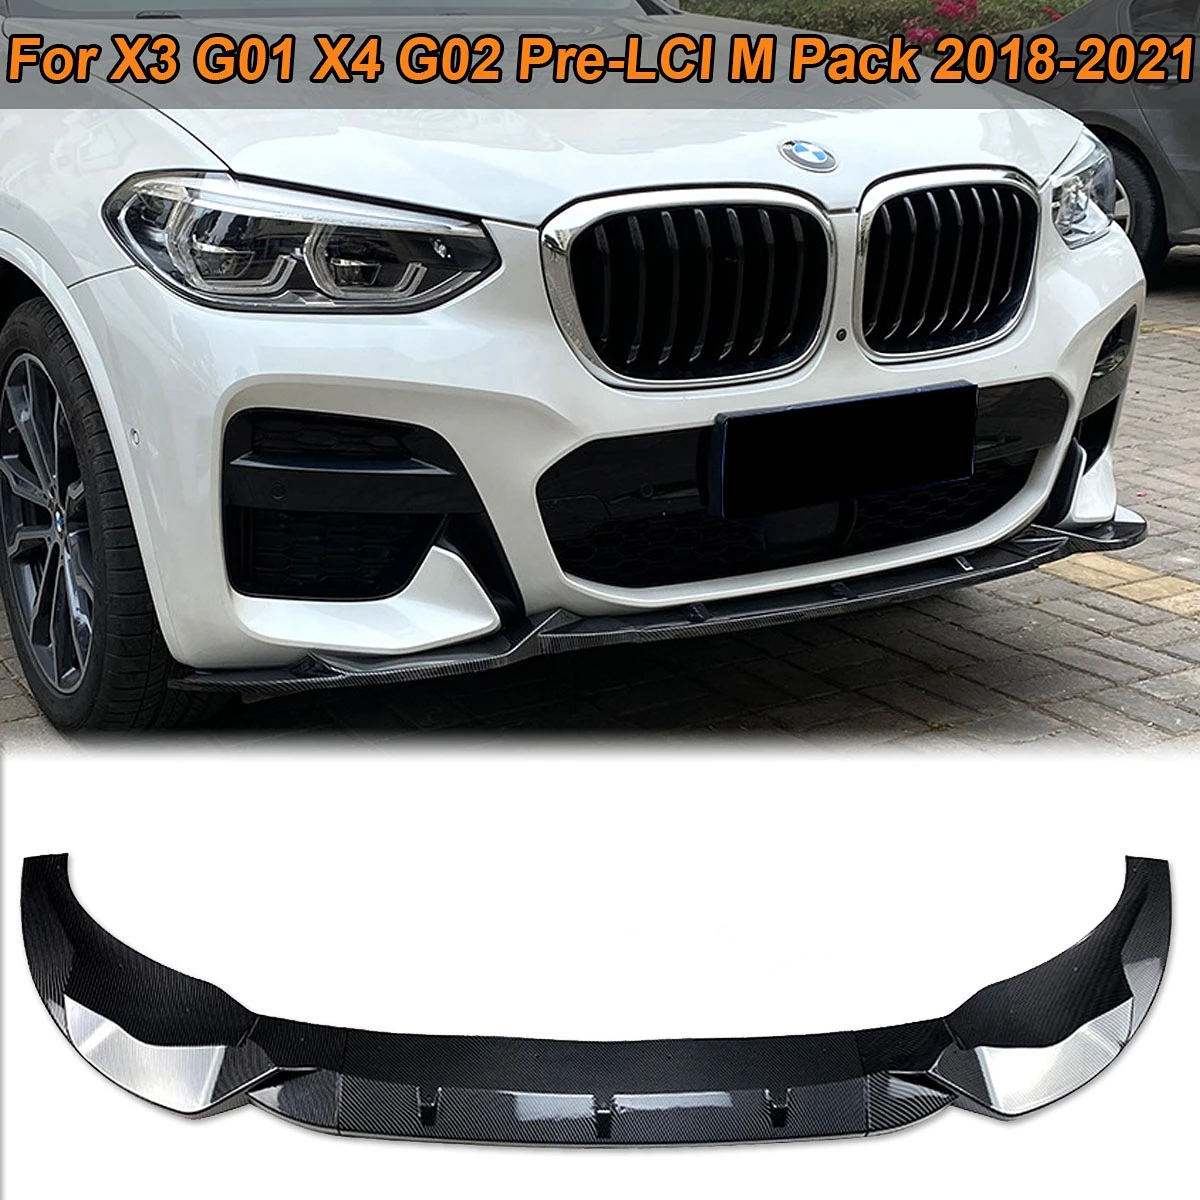 

For BMW X3 G01 X4 G02 M Sport 2018-2021 Front Bumper Lip Spoiler Deflector Side Splitter Body Kit Guards Cover Car Accessories